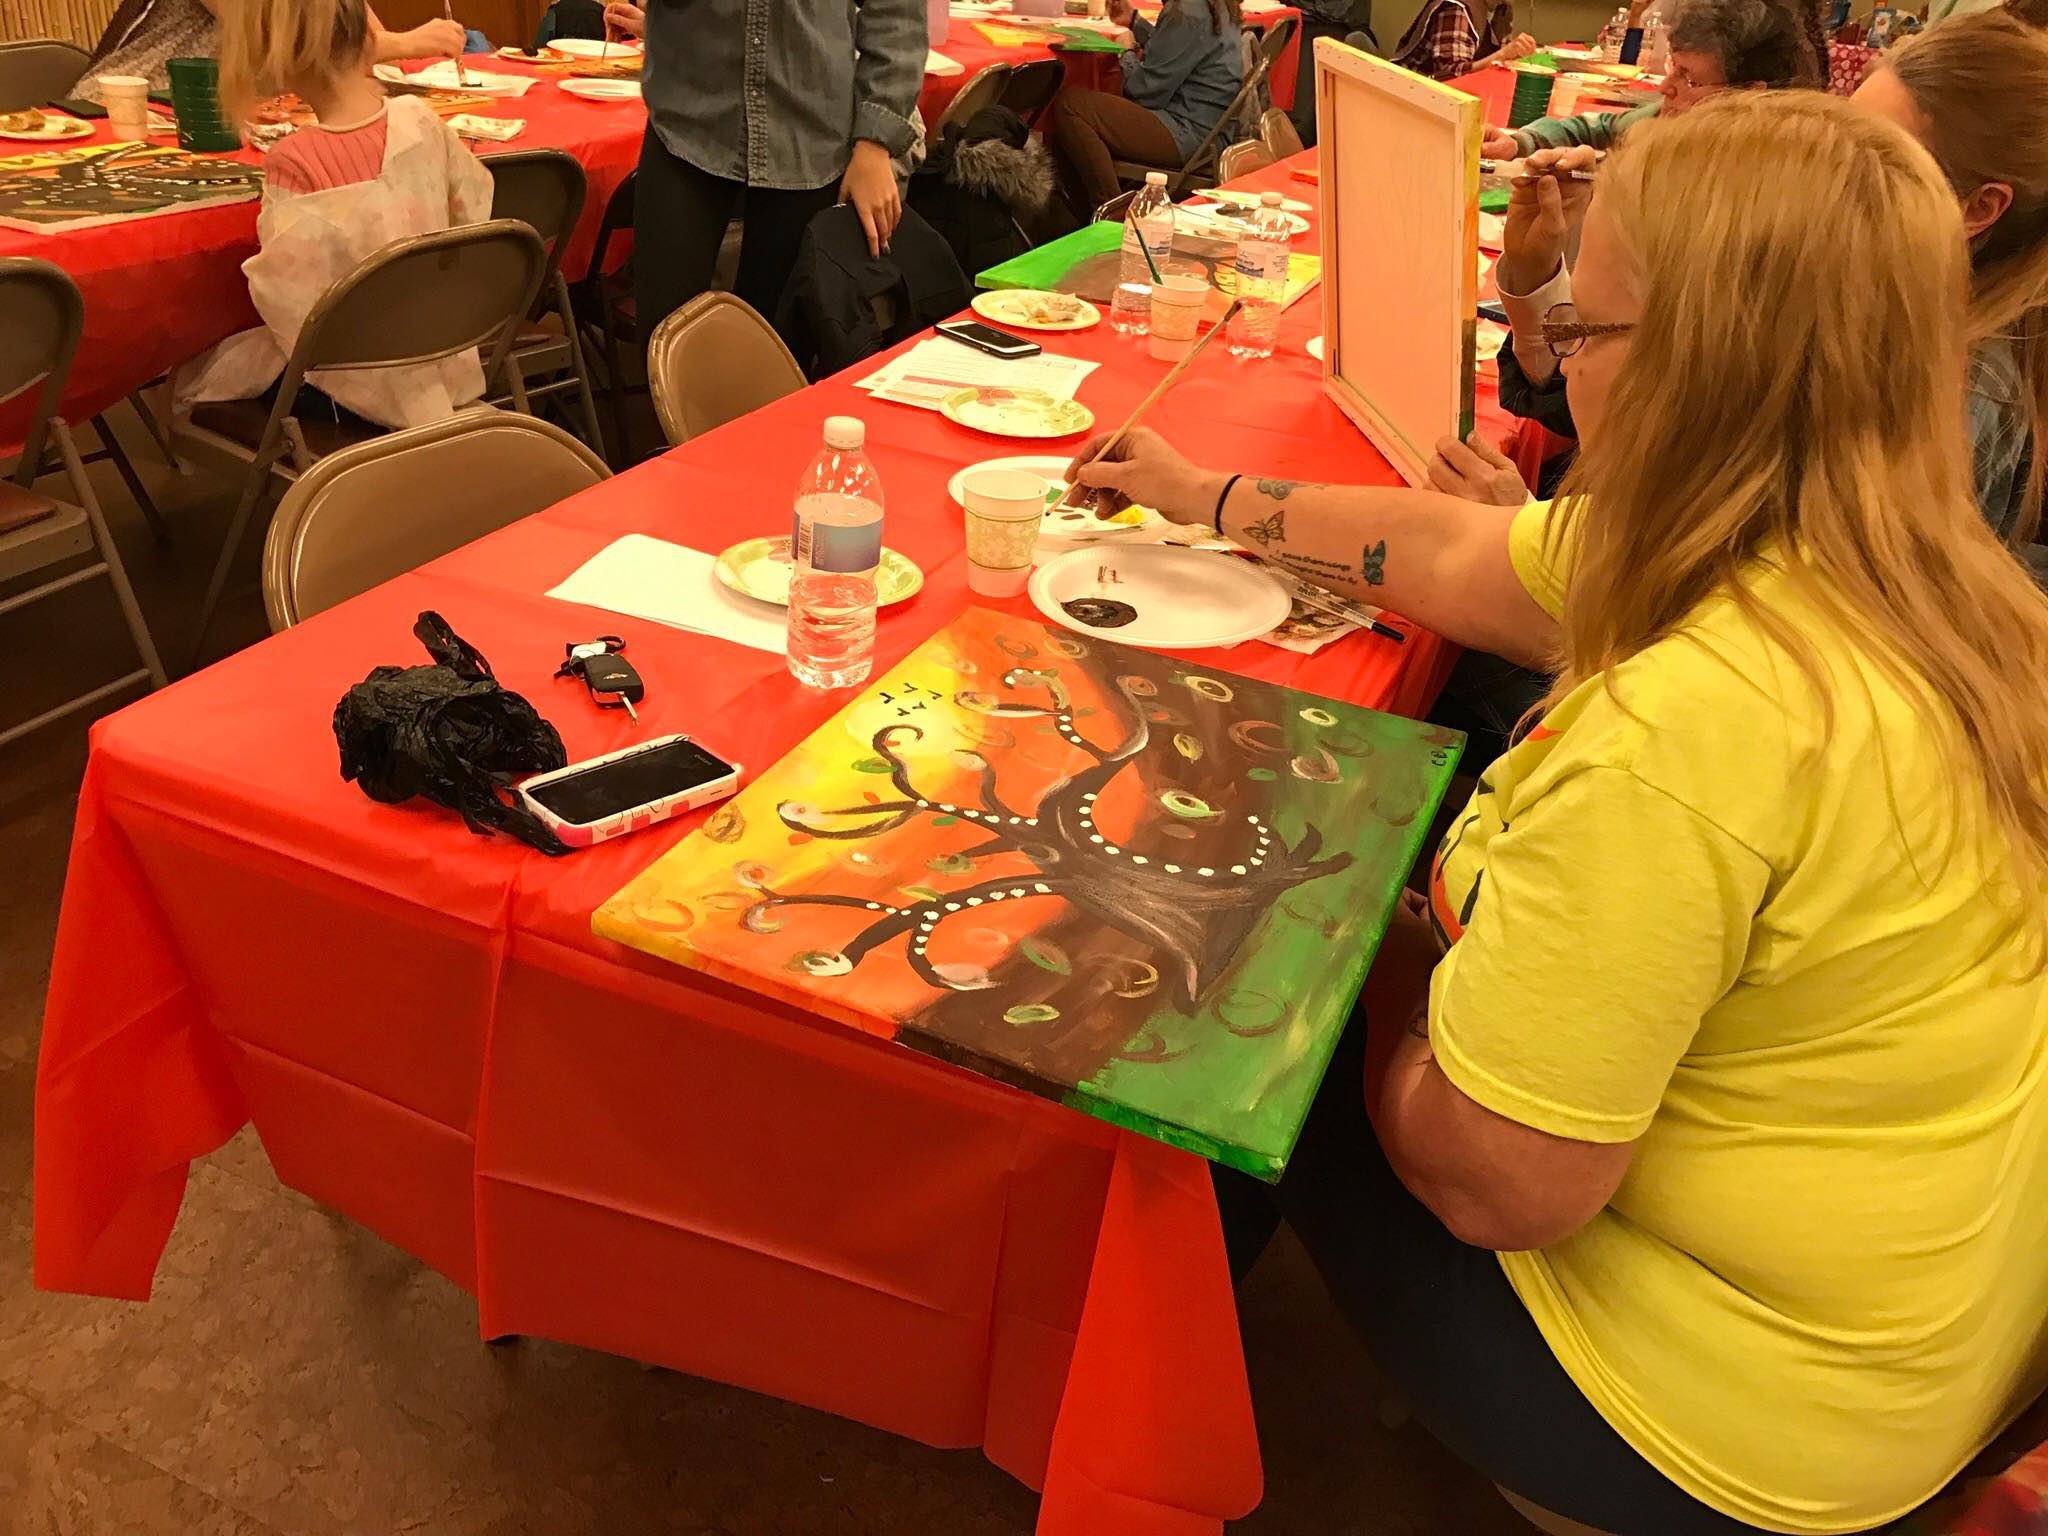 2017-01-17 Inspired Sisters Women's Ministry of Zions Church - Be Social Let's Make a Painting